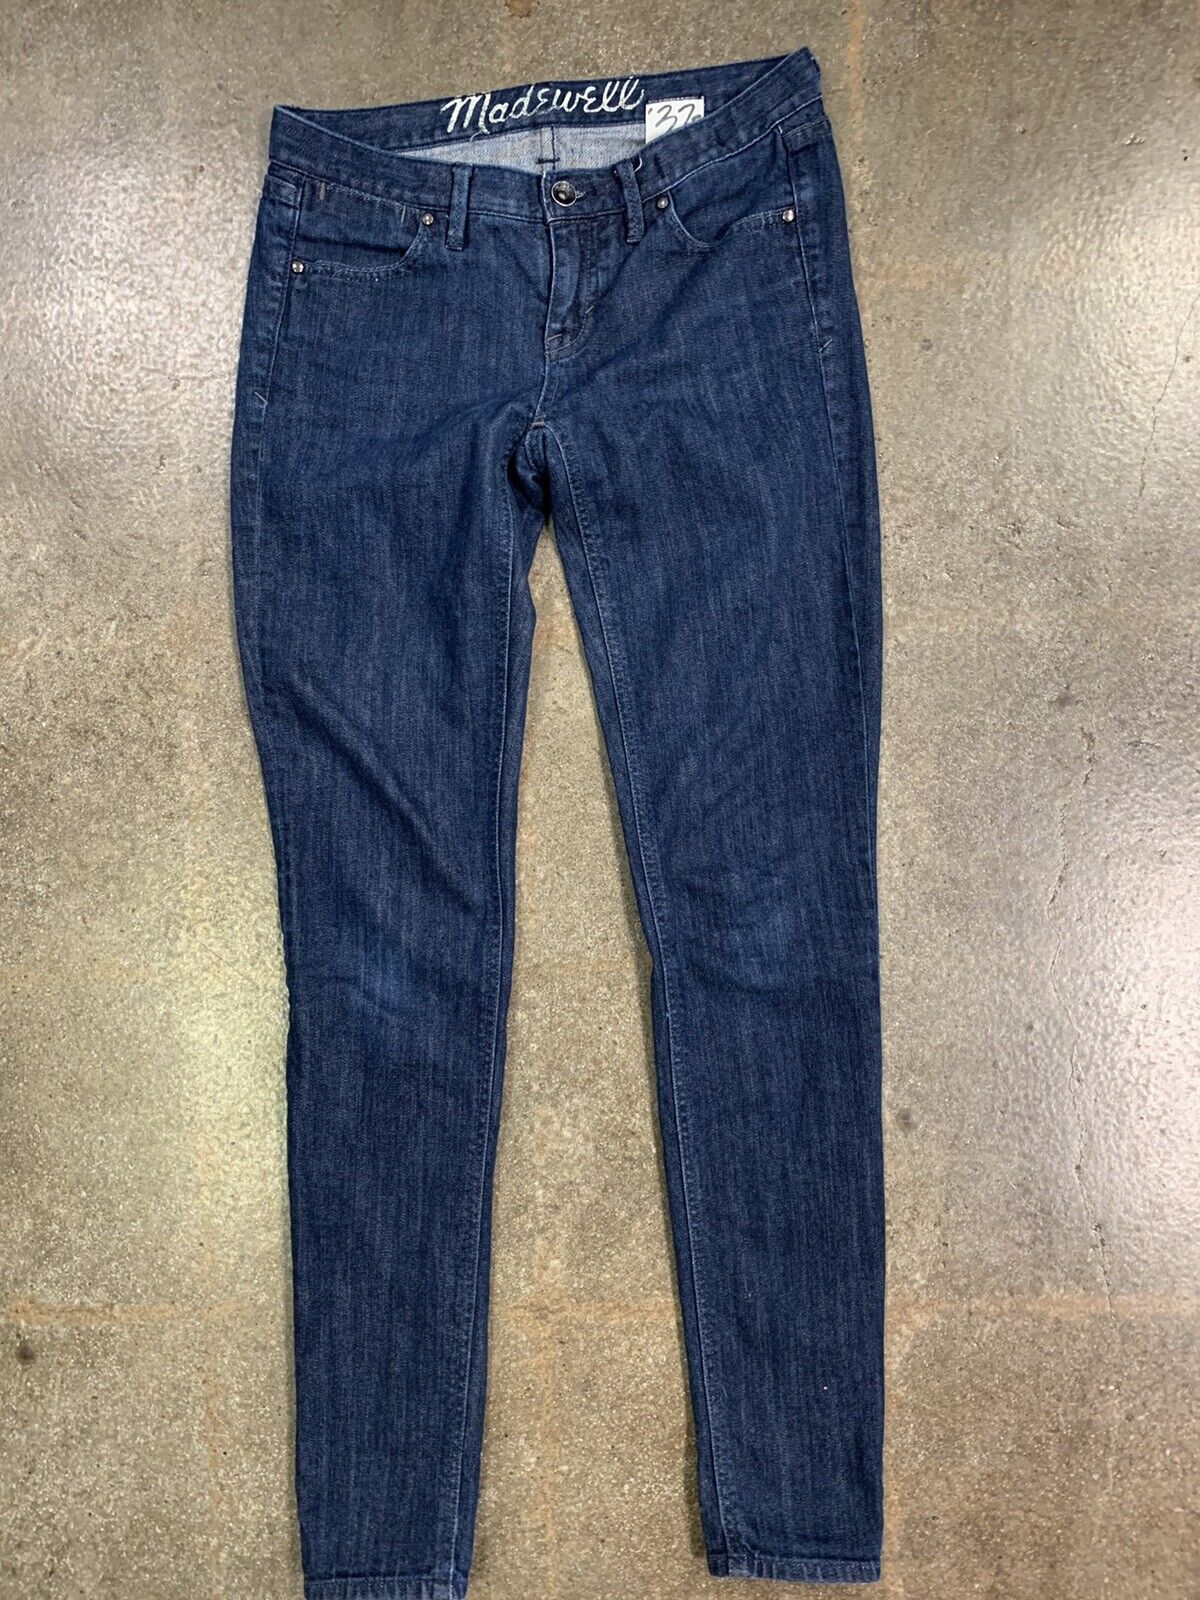 Madewell 37s Skinny Jeans Size 24x32